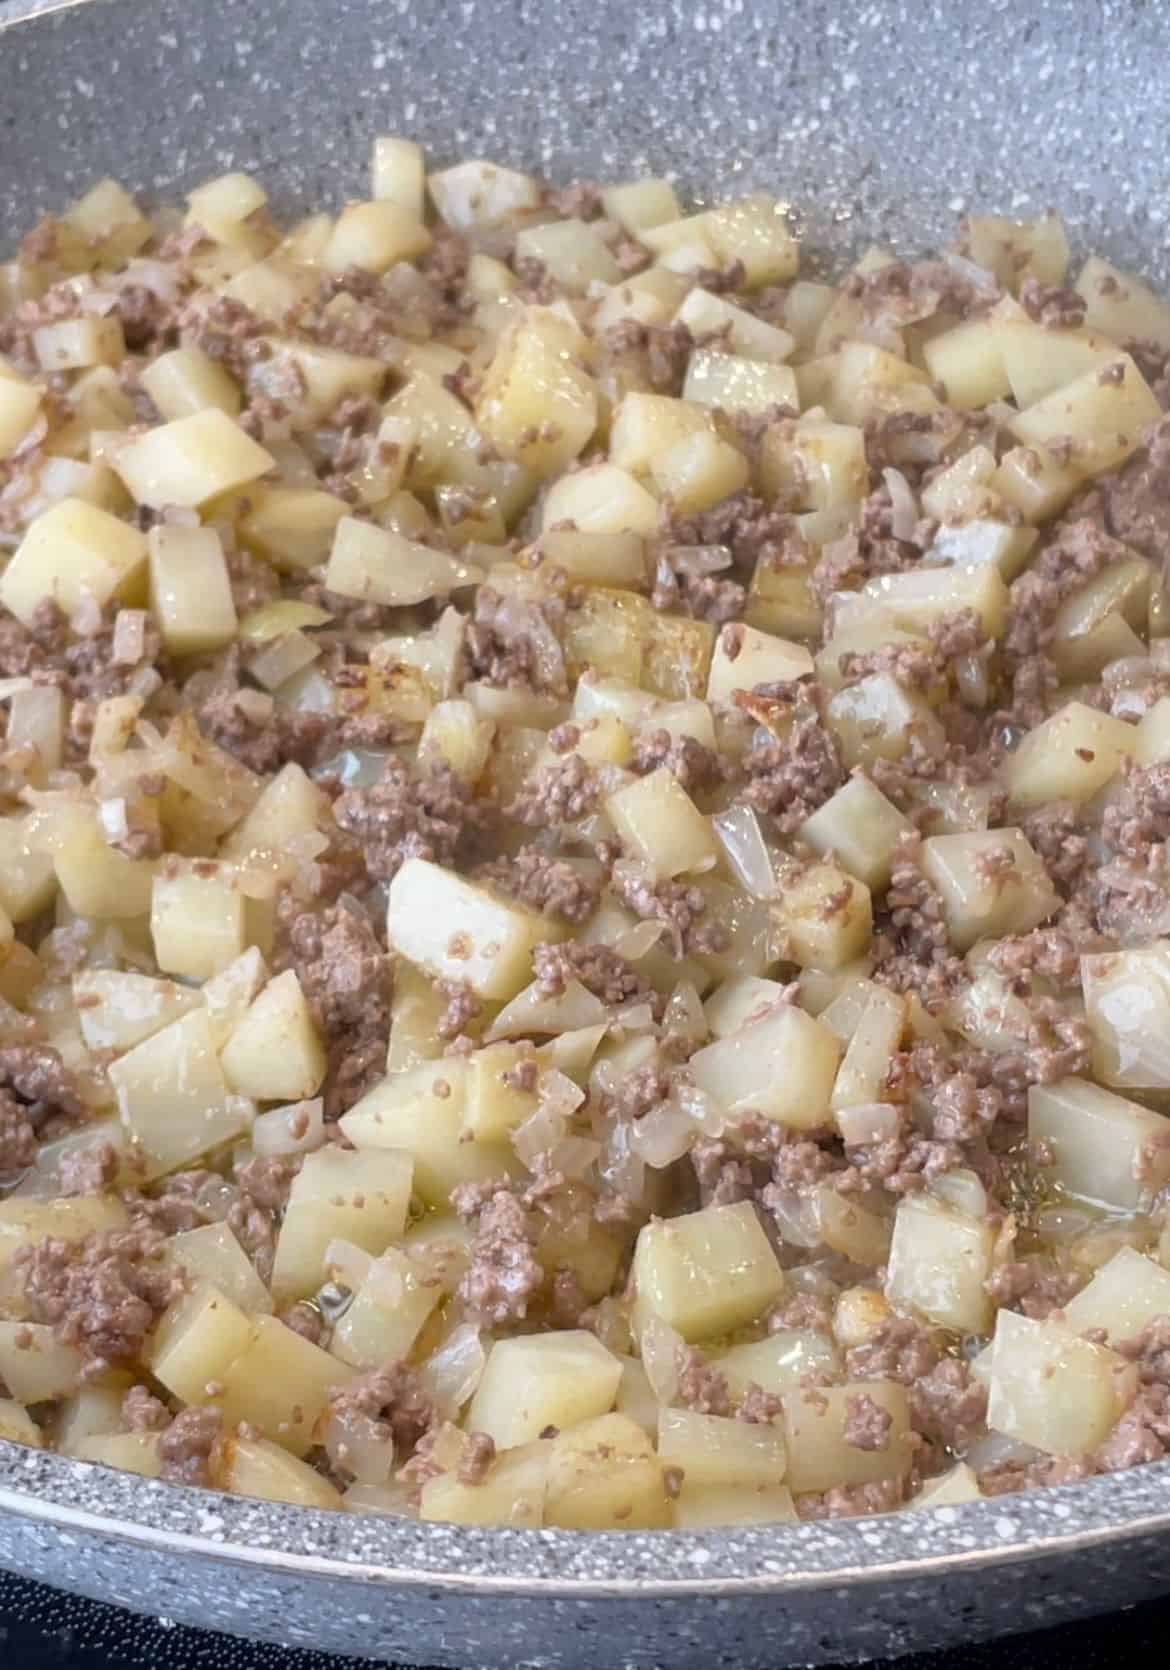 a skillet that contains sauteed onions, potatoes, and ground beef